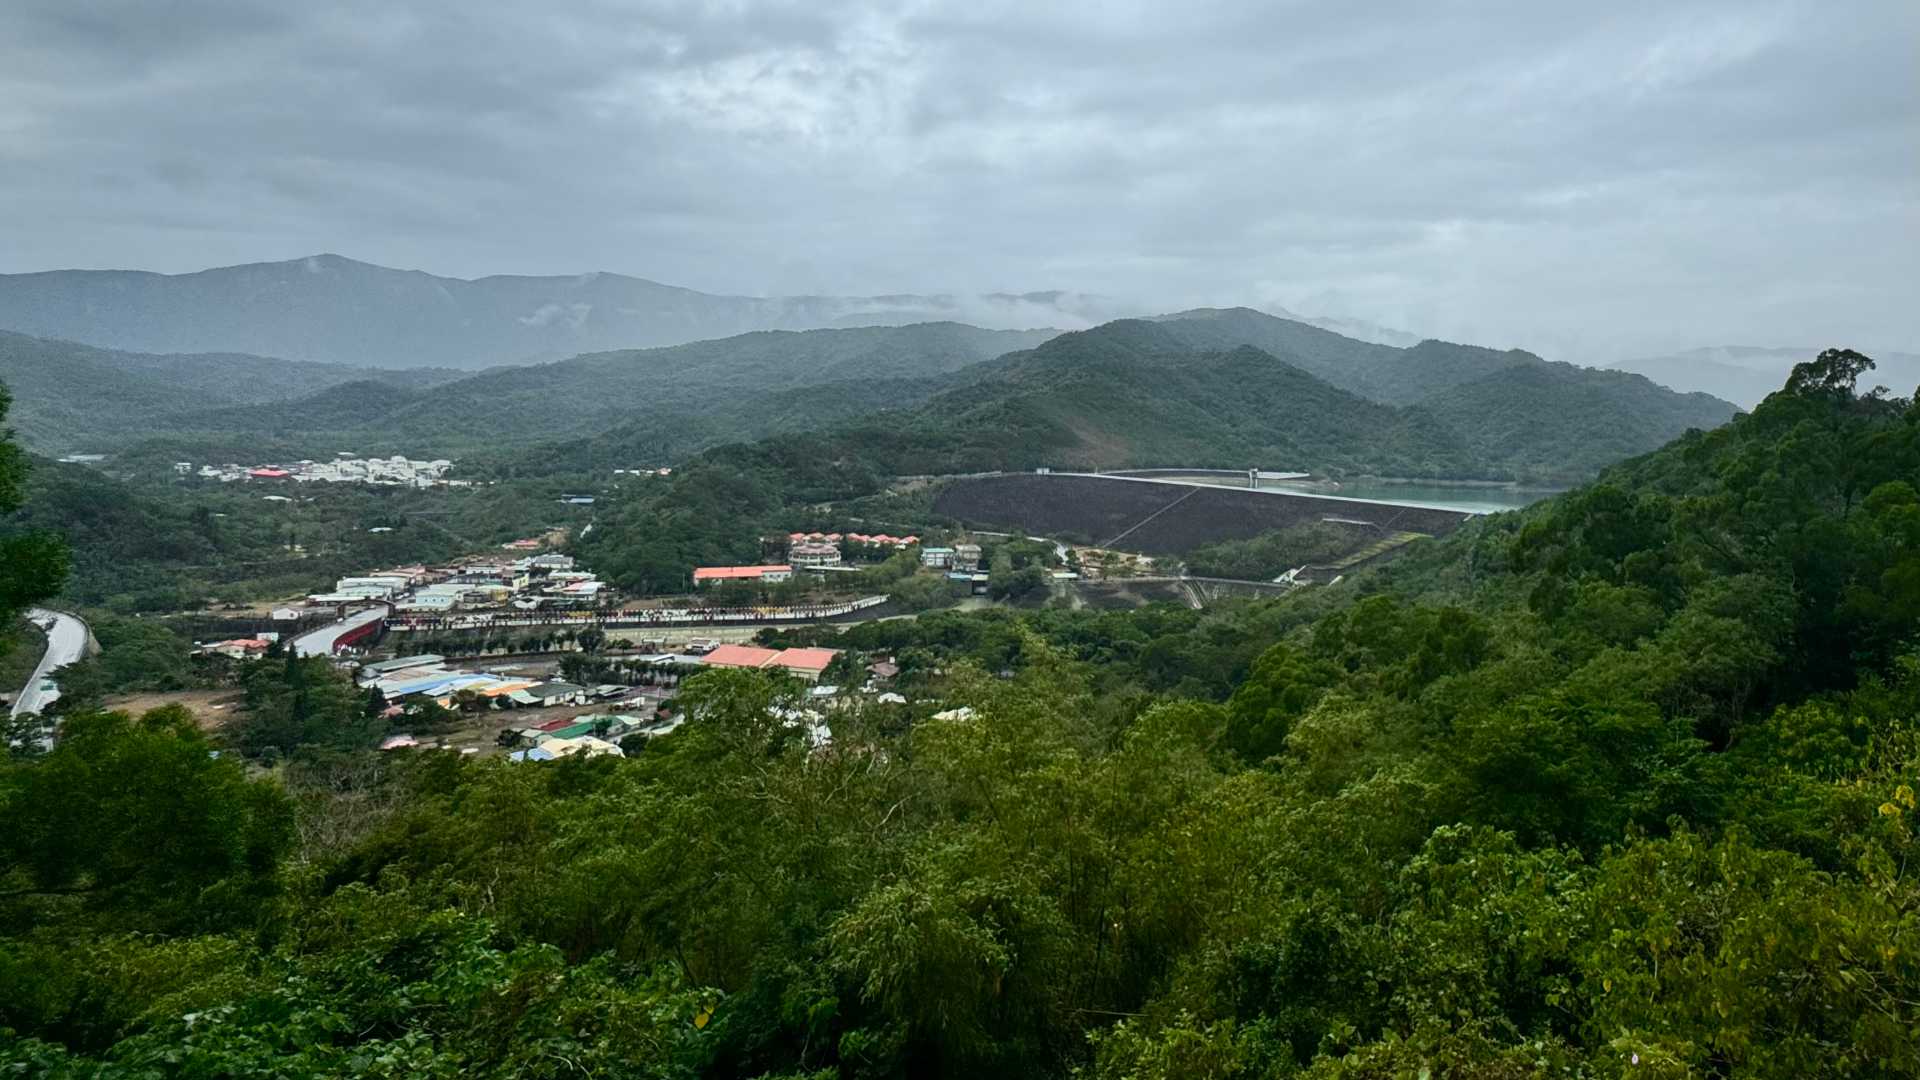 Wide-angle view of Mudan Township beneath a large dam filled with water, and surrounded by bush-clad mountains.